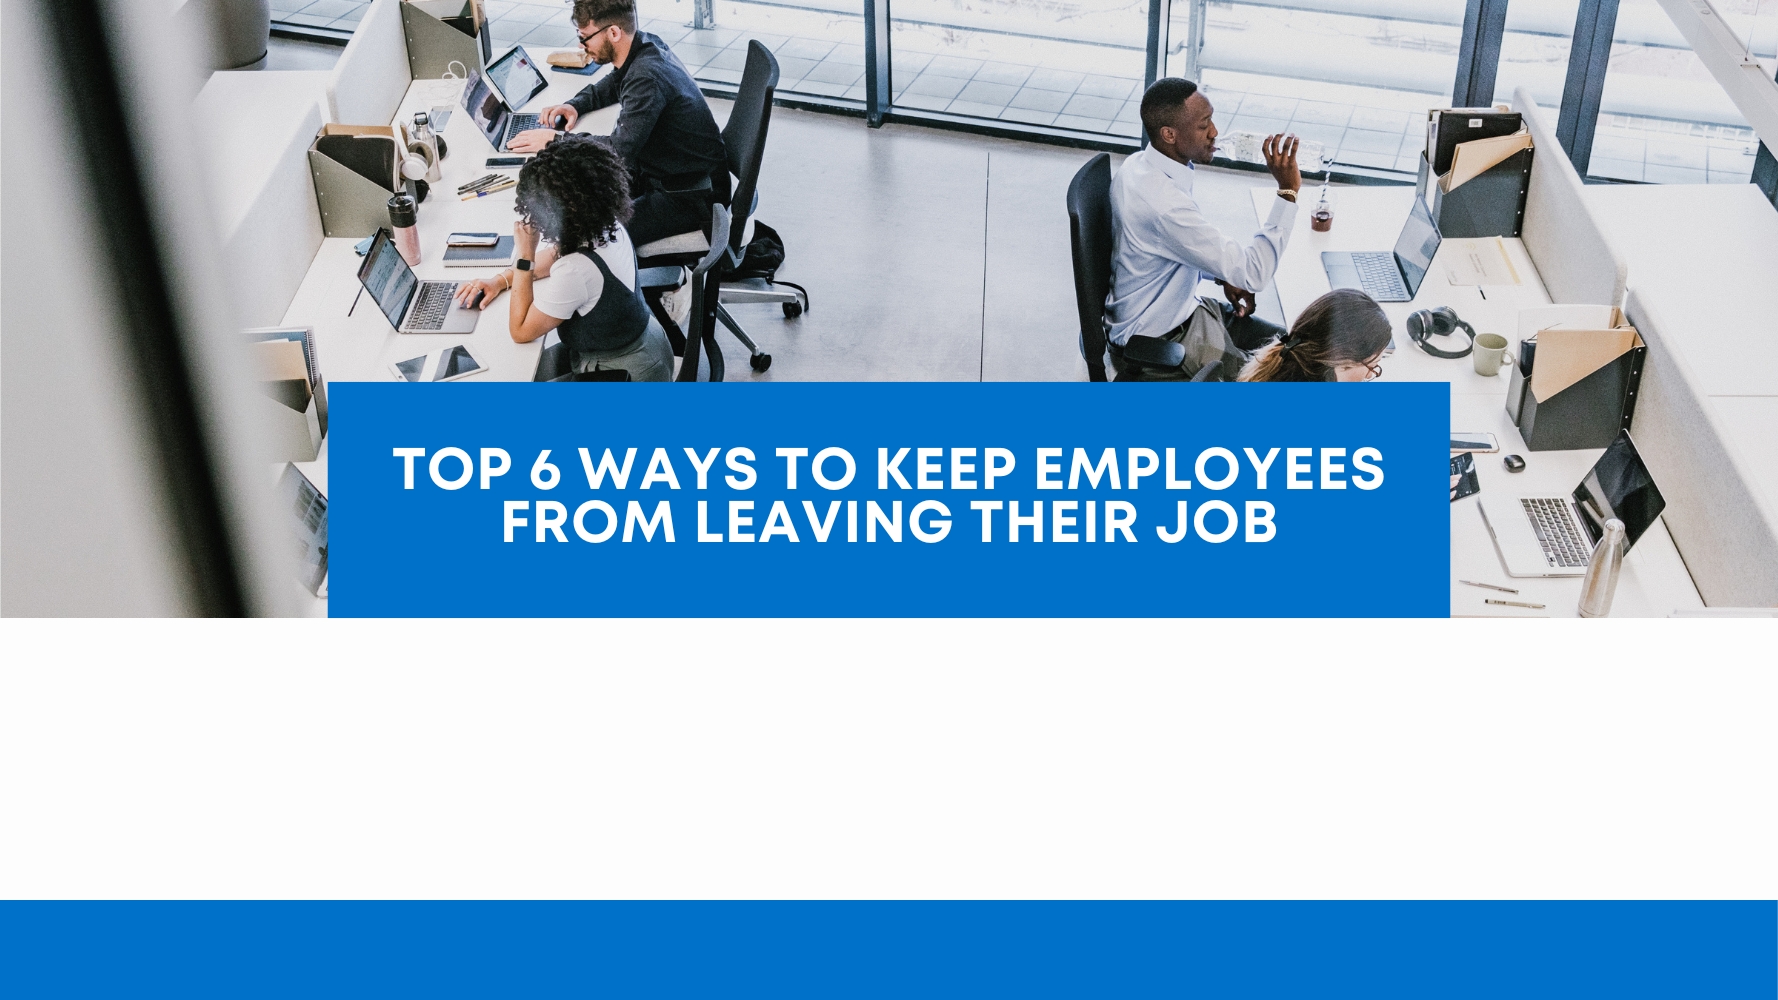 Top 6 Ways to Keep Employees from Leaving their Job